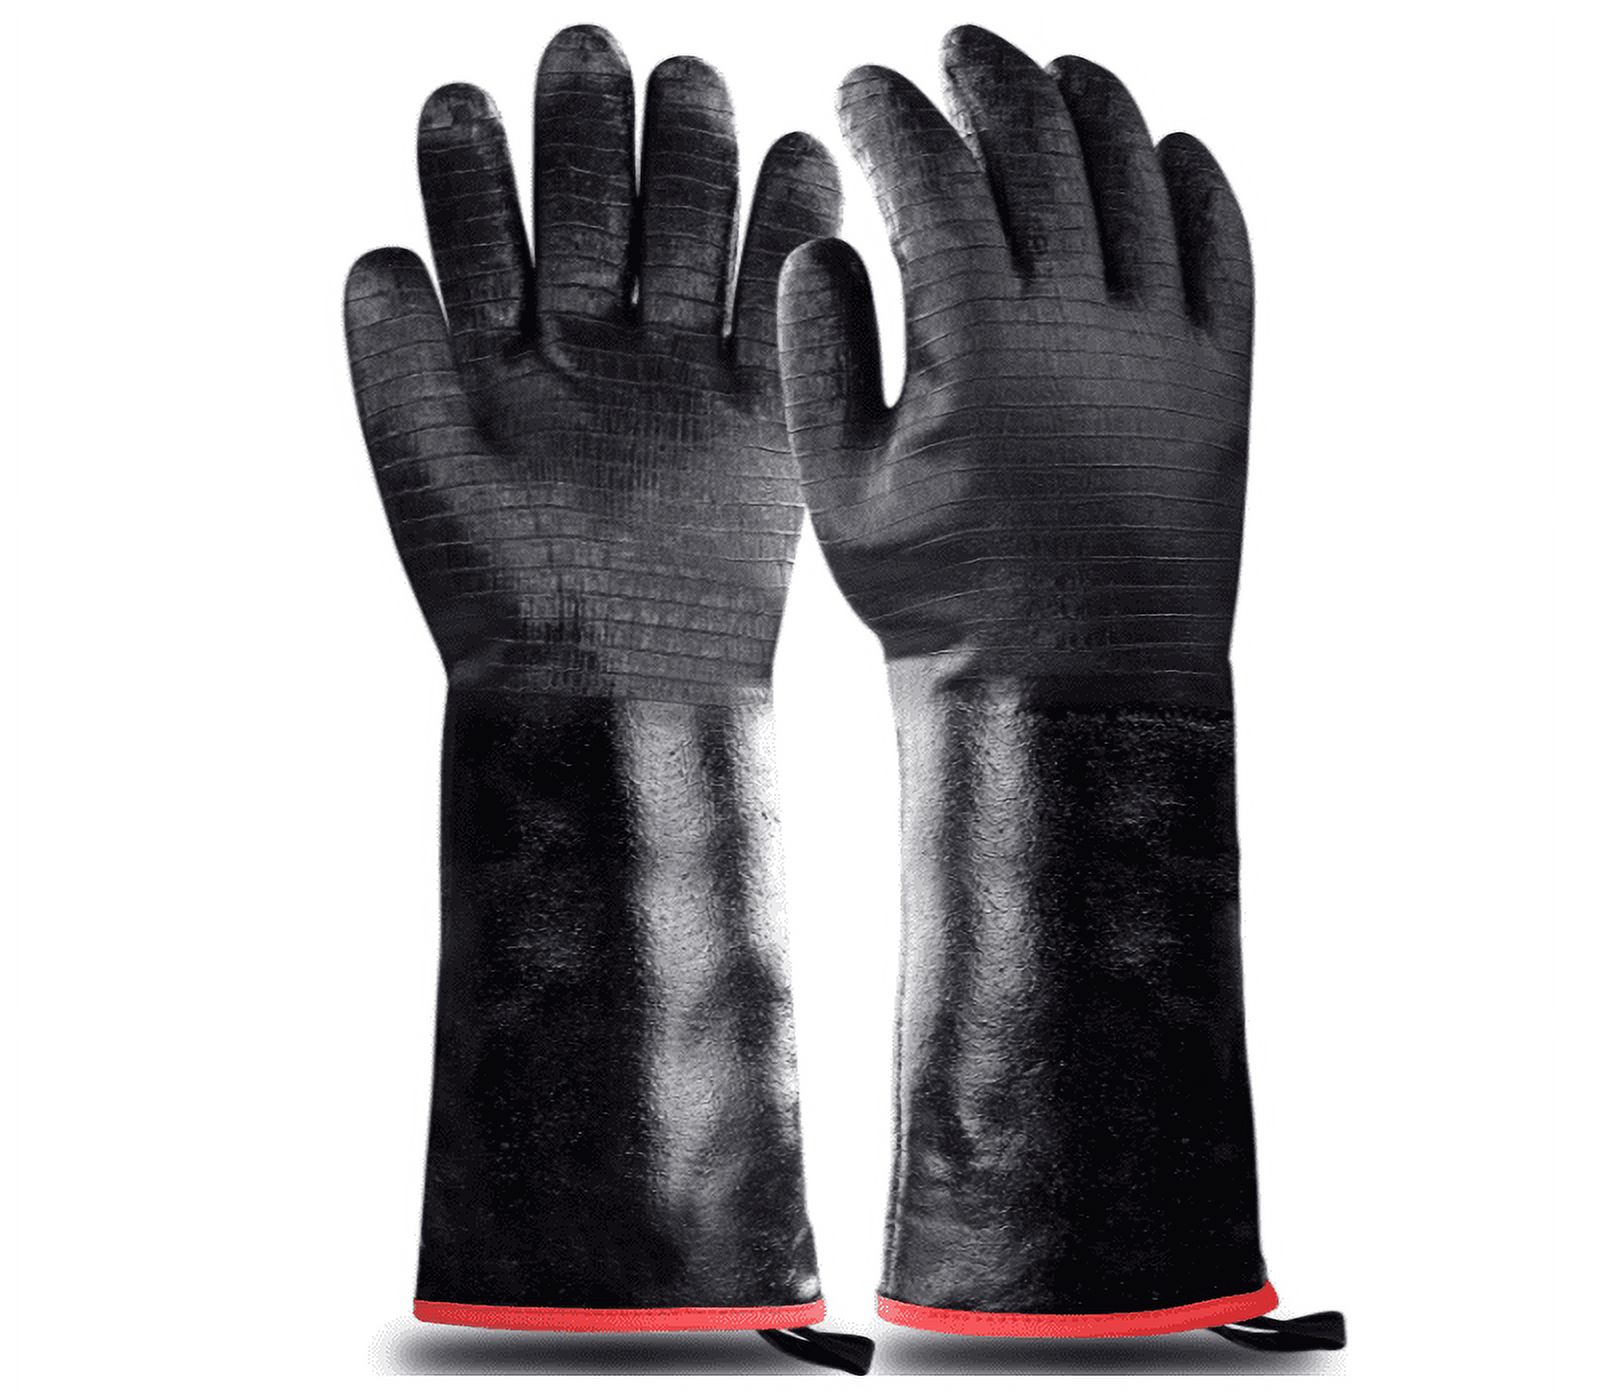 Heat Resistant-Smoker BBQ Gloves 14 Inches,932℉, Grill, Cooking Barbecue Gloves, to Handling Heat Food Right on Your Fryer,Grill,Oven. Waterproof, Fireproof, Oil Resistant Neoprene Coating - image 1 of 7